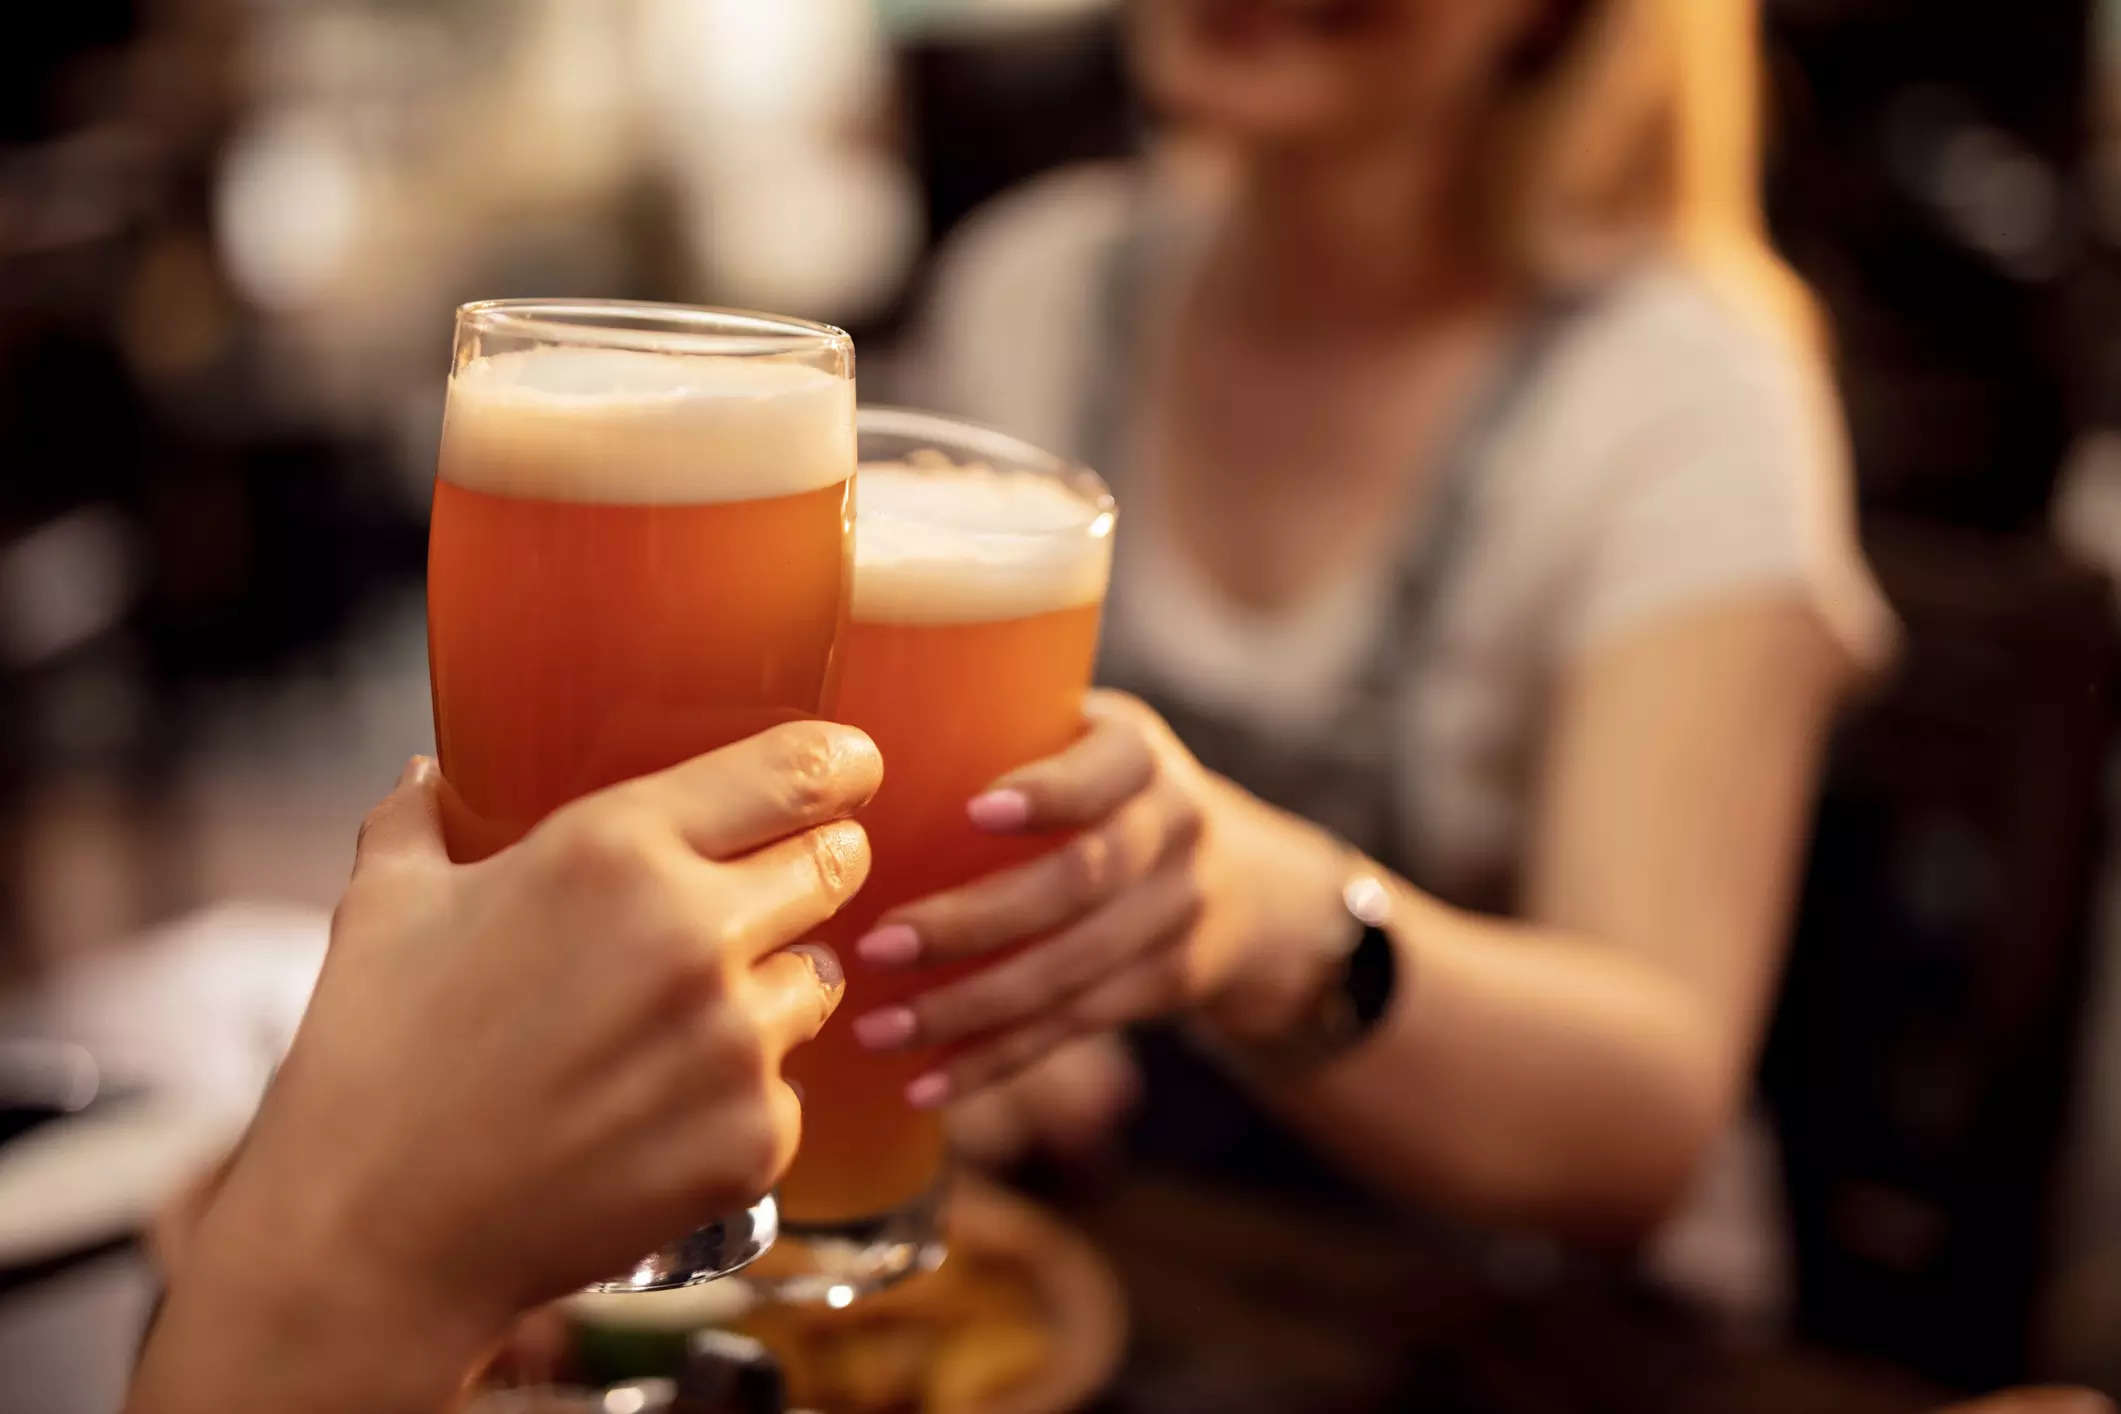 Drinking A Pint Of Beer Every Night Can Age Your Brain By Two Years Finds Study